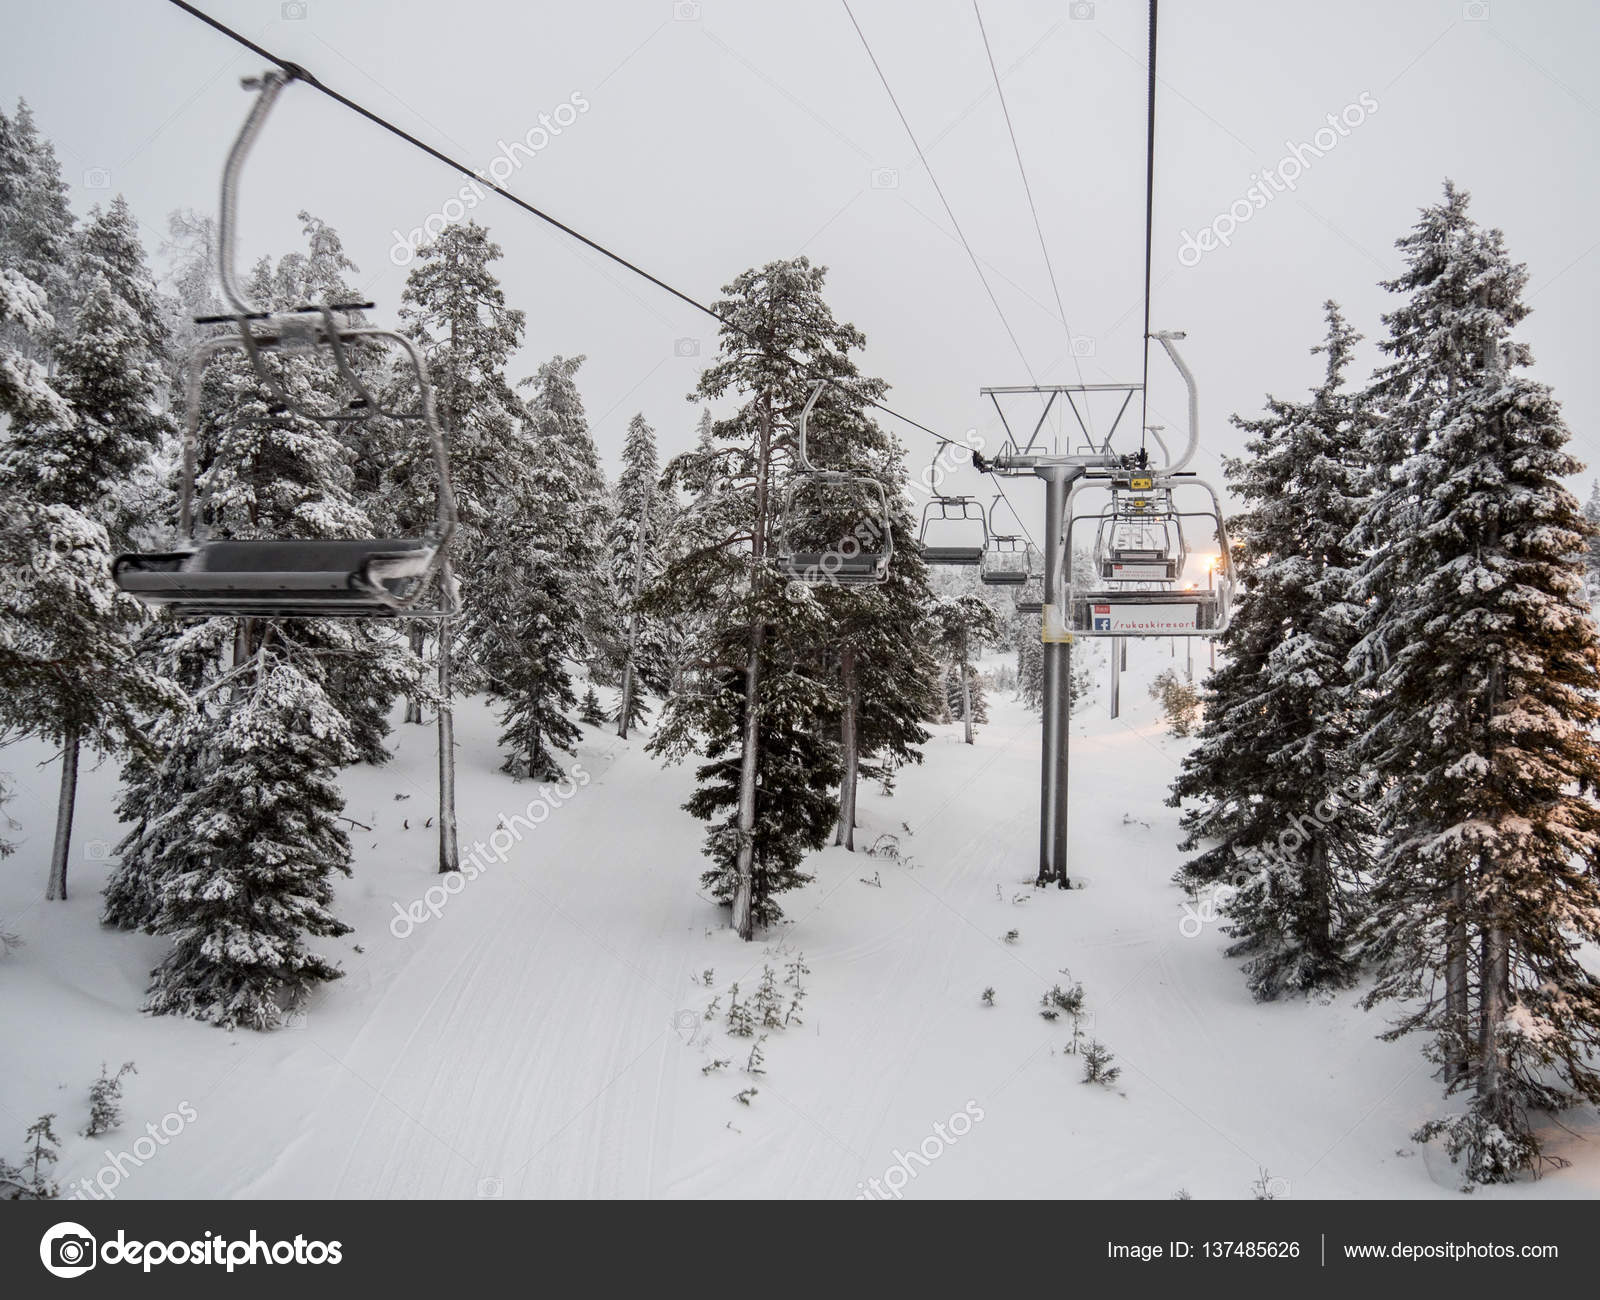 RUKA, FINLAND - JANUARY 2017: Ski lift with seats going over the ...